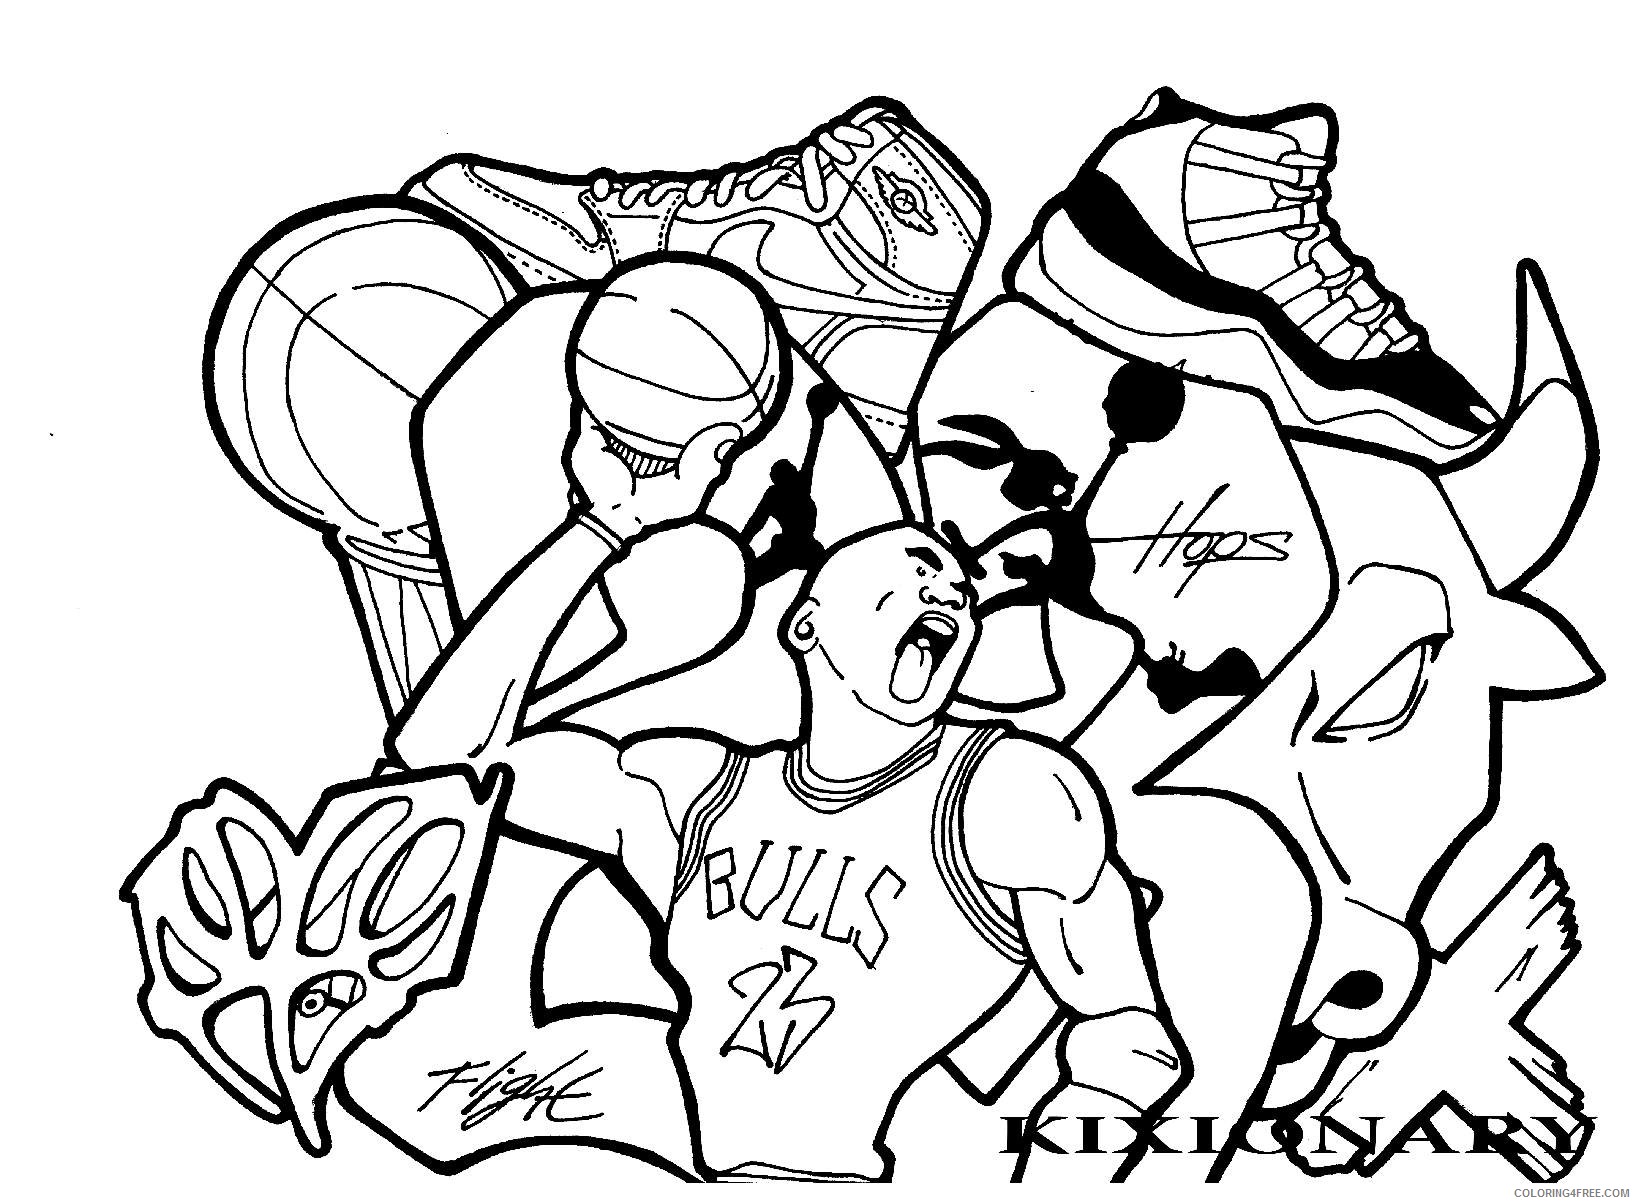 graffiti coloring pages basketball by kixionary Coloring4free